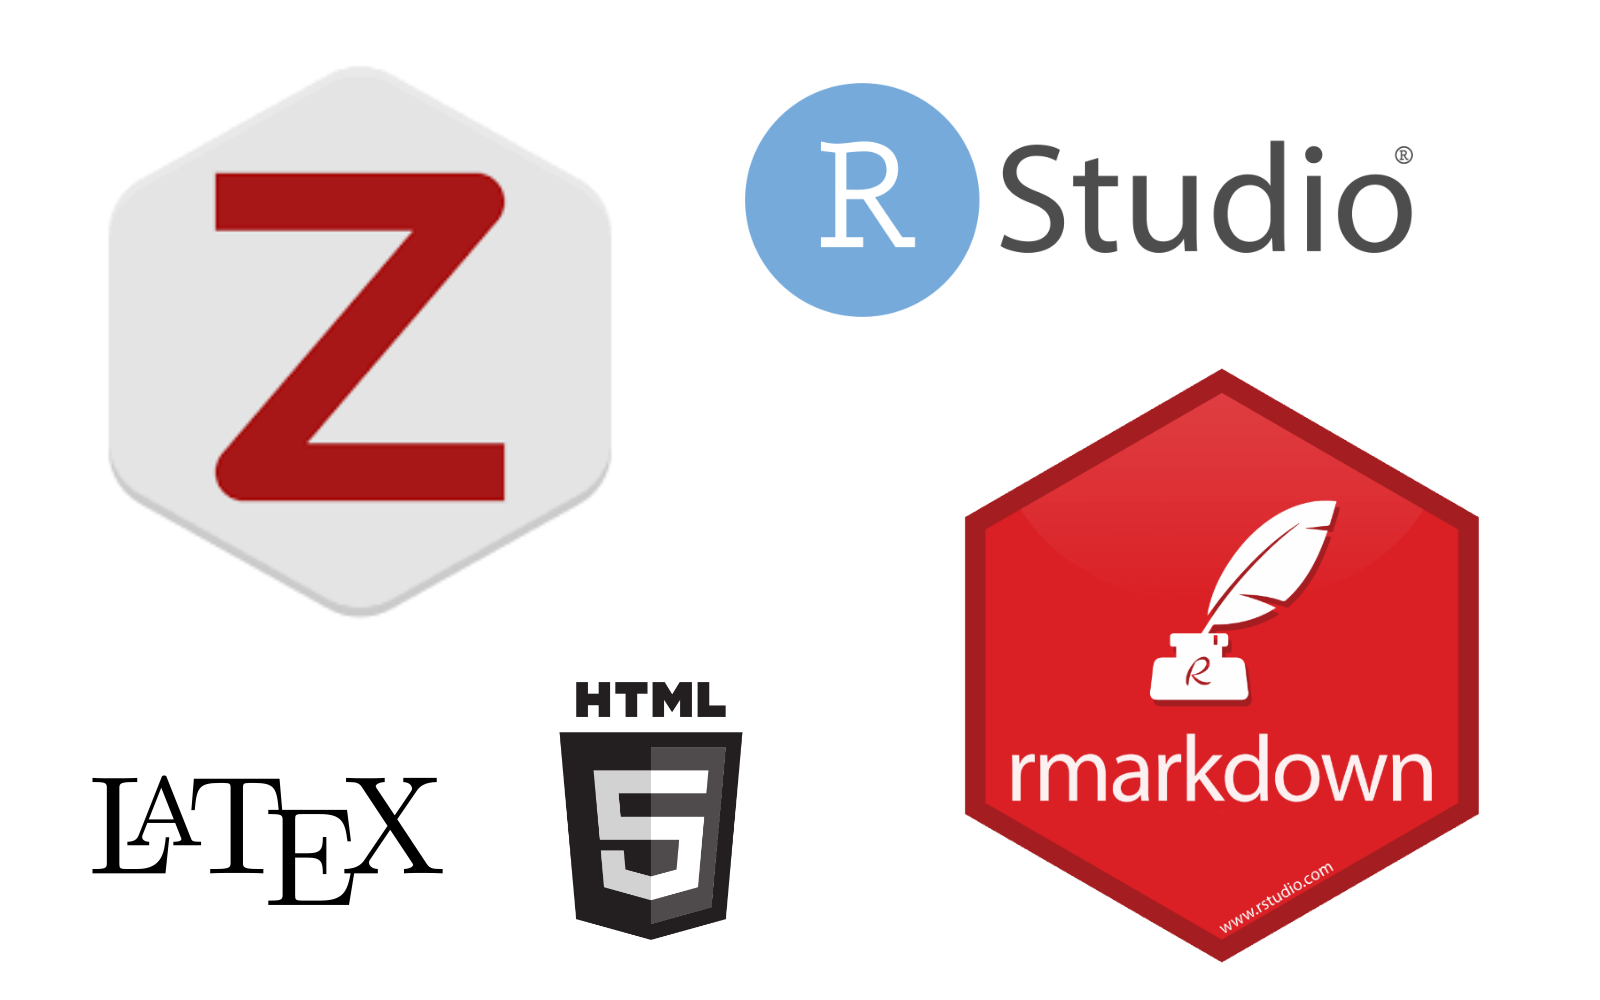 Zotero hacks: unlimited synced storage and its smooth use with rmarkdown